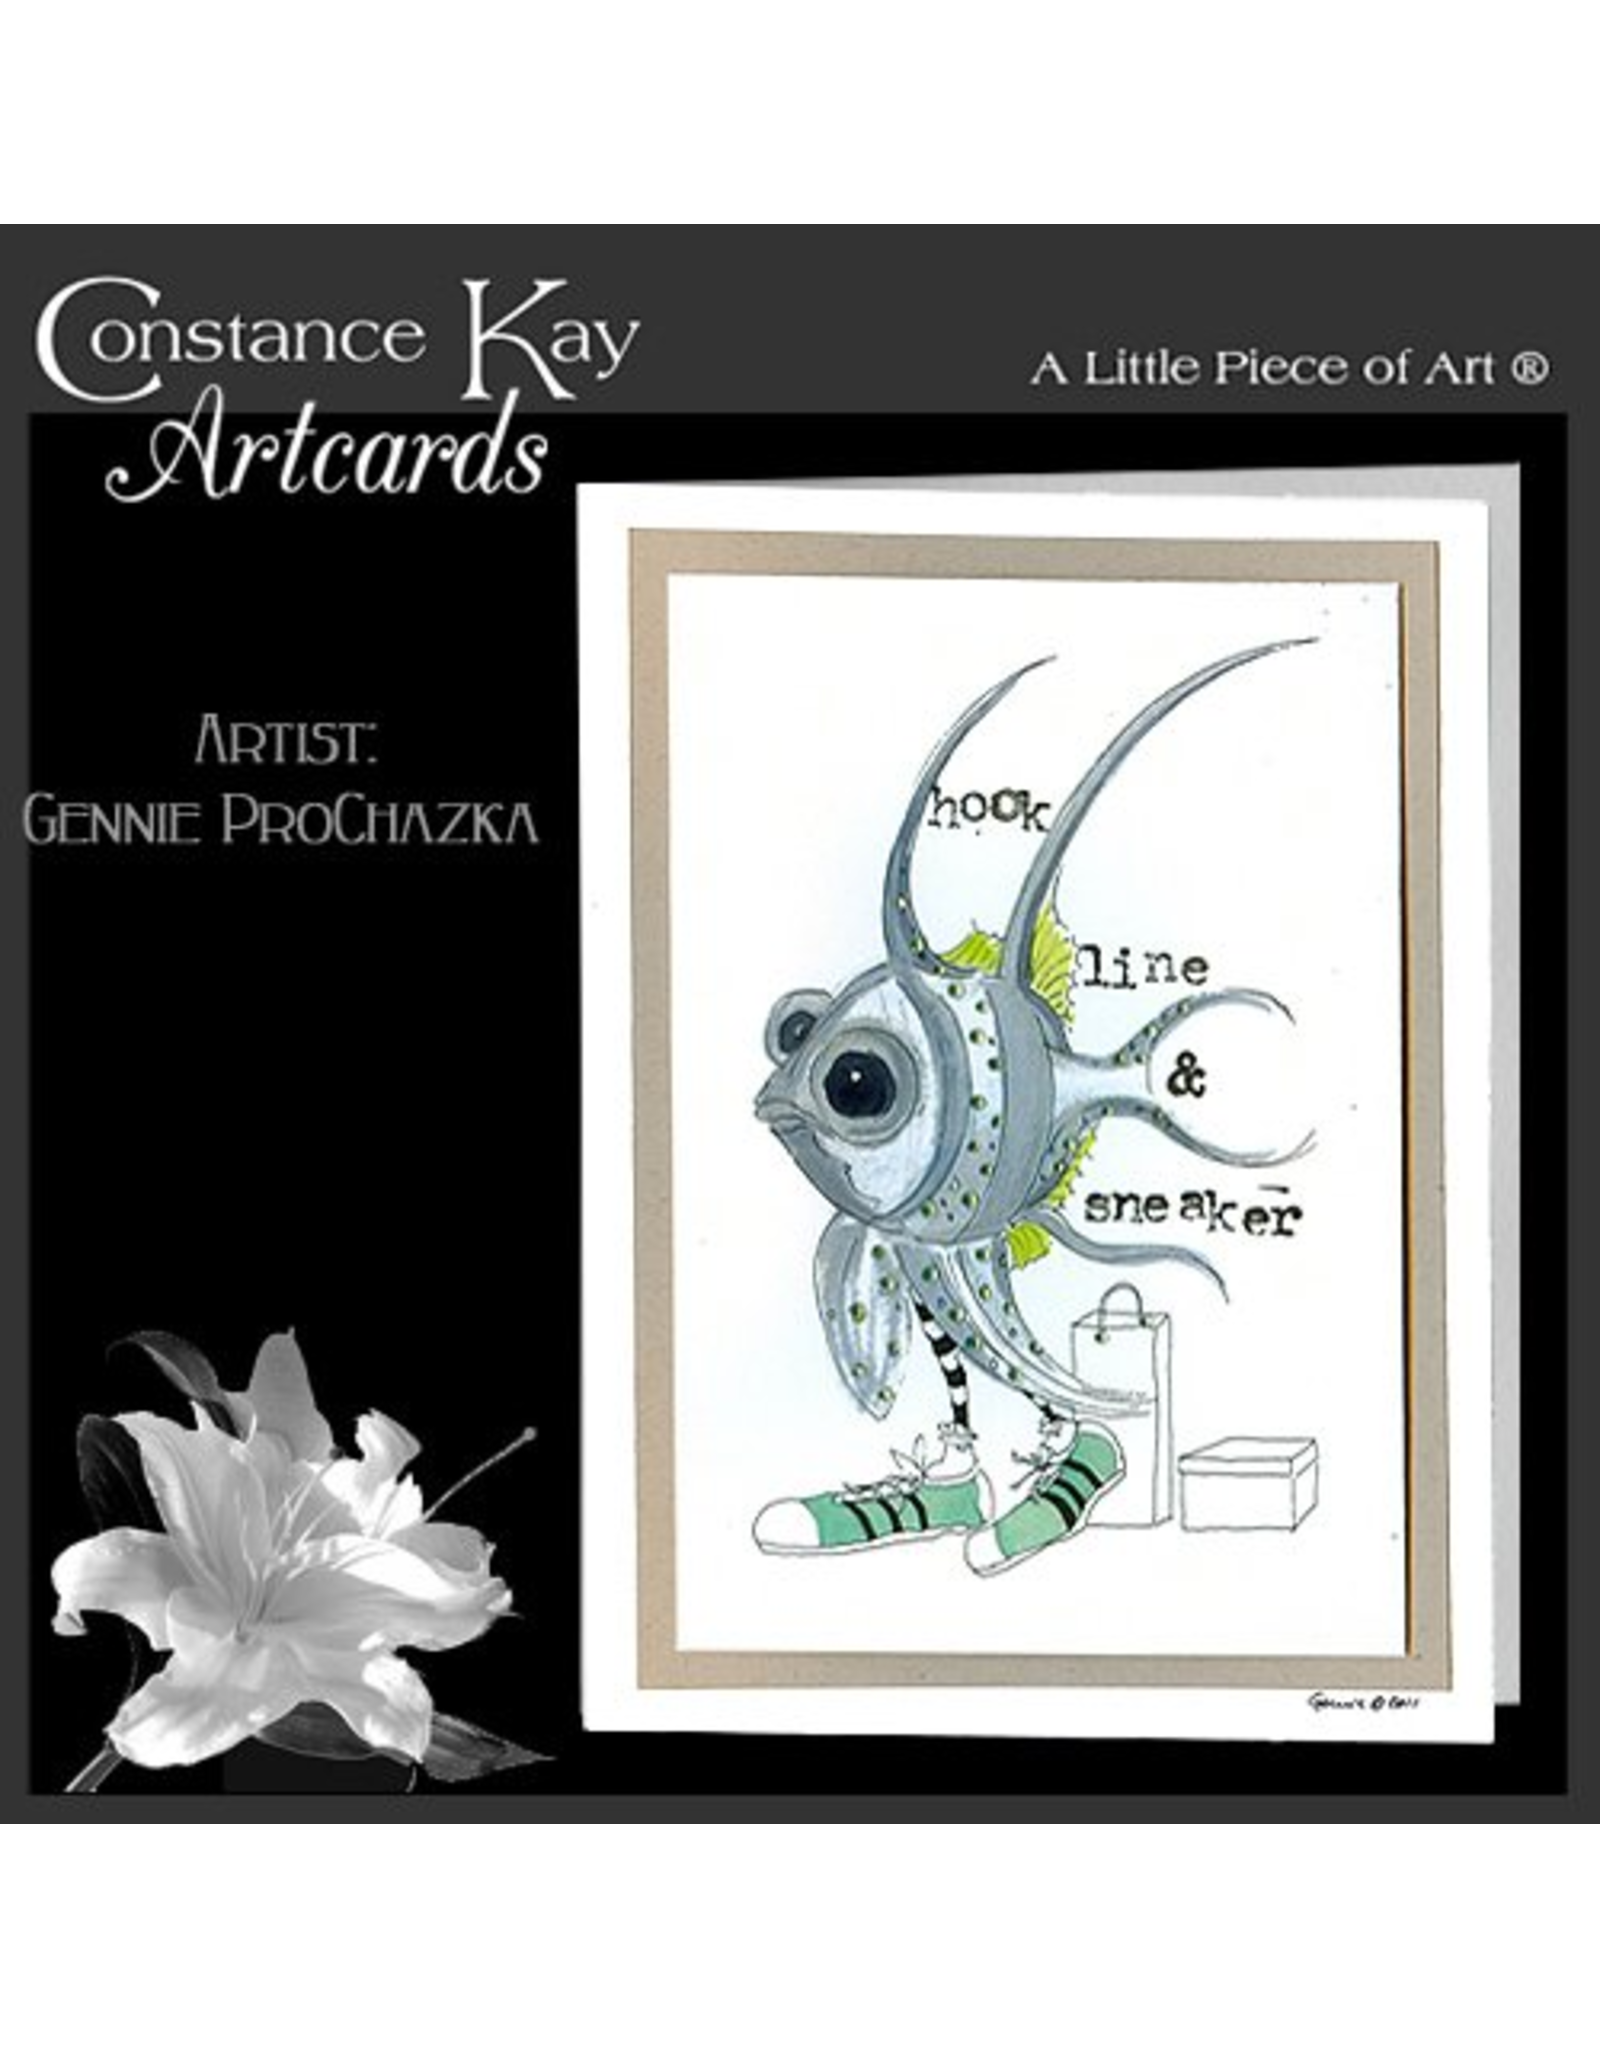 Constance Kay Art Card Hook Line and Sneaker